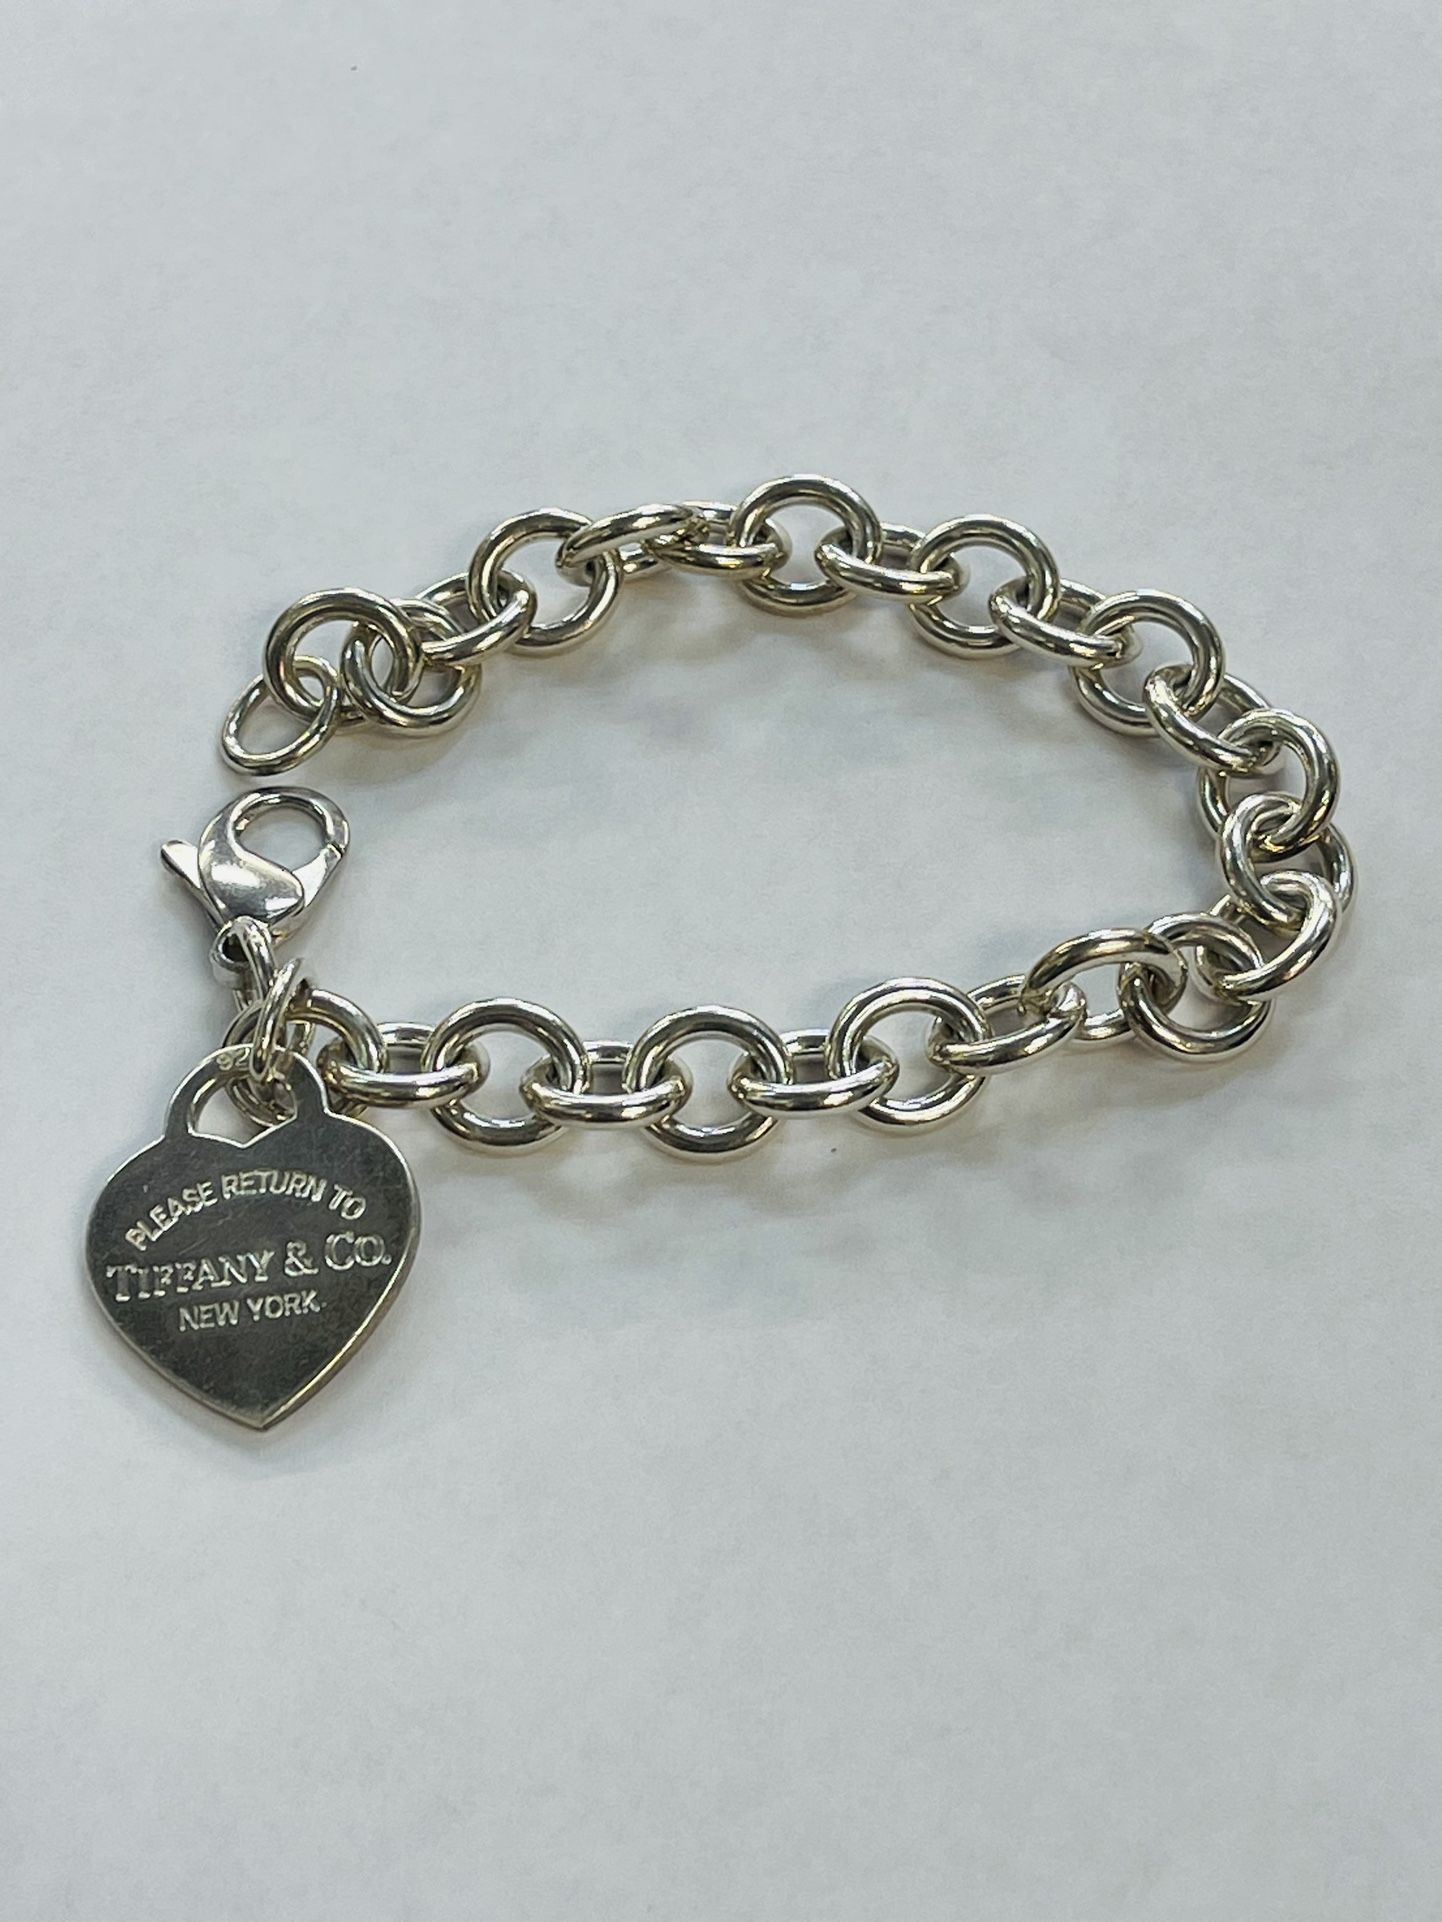 AUTHENTIC! Tiffany & Co. 925 Sterling Silver Heart Tag Charm Bracelet 7.5"